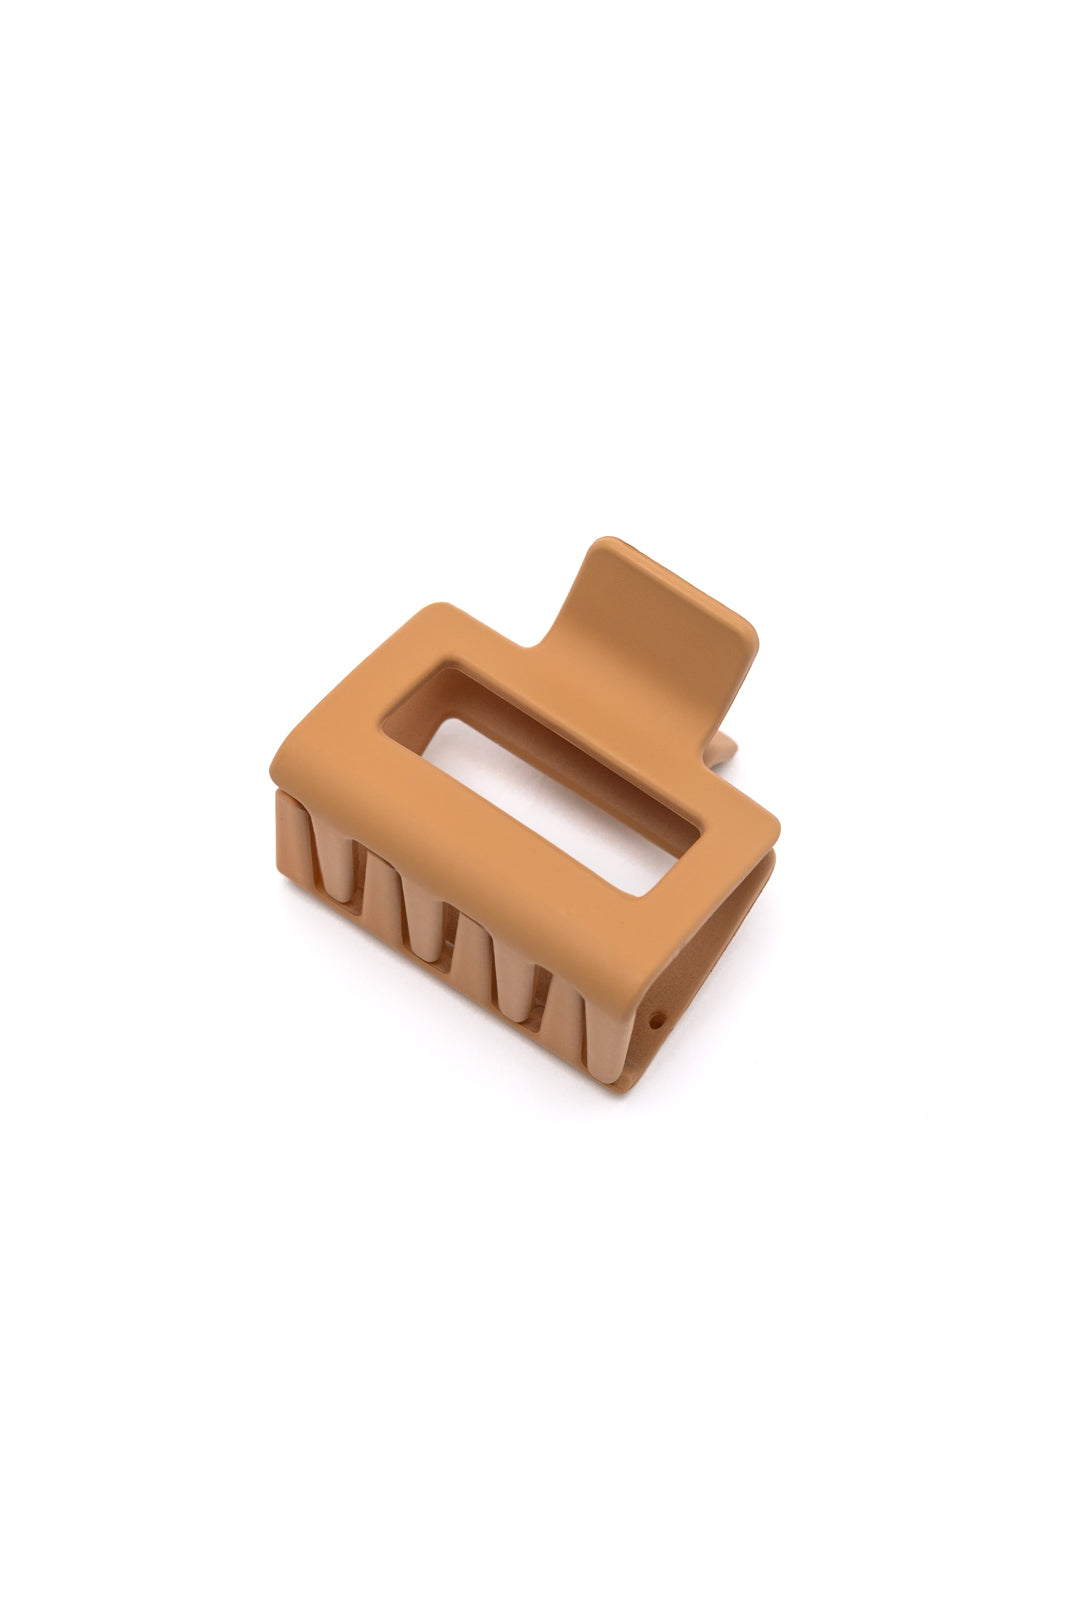 Small Square Claw Clip in Light Brown (Ships in 1-2 Weeks)